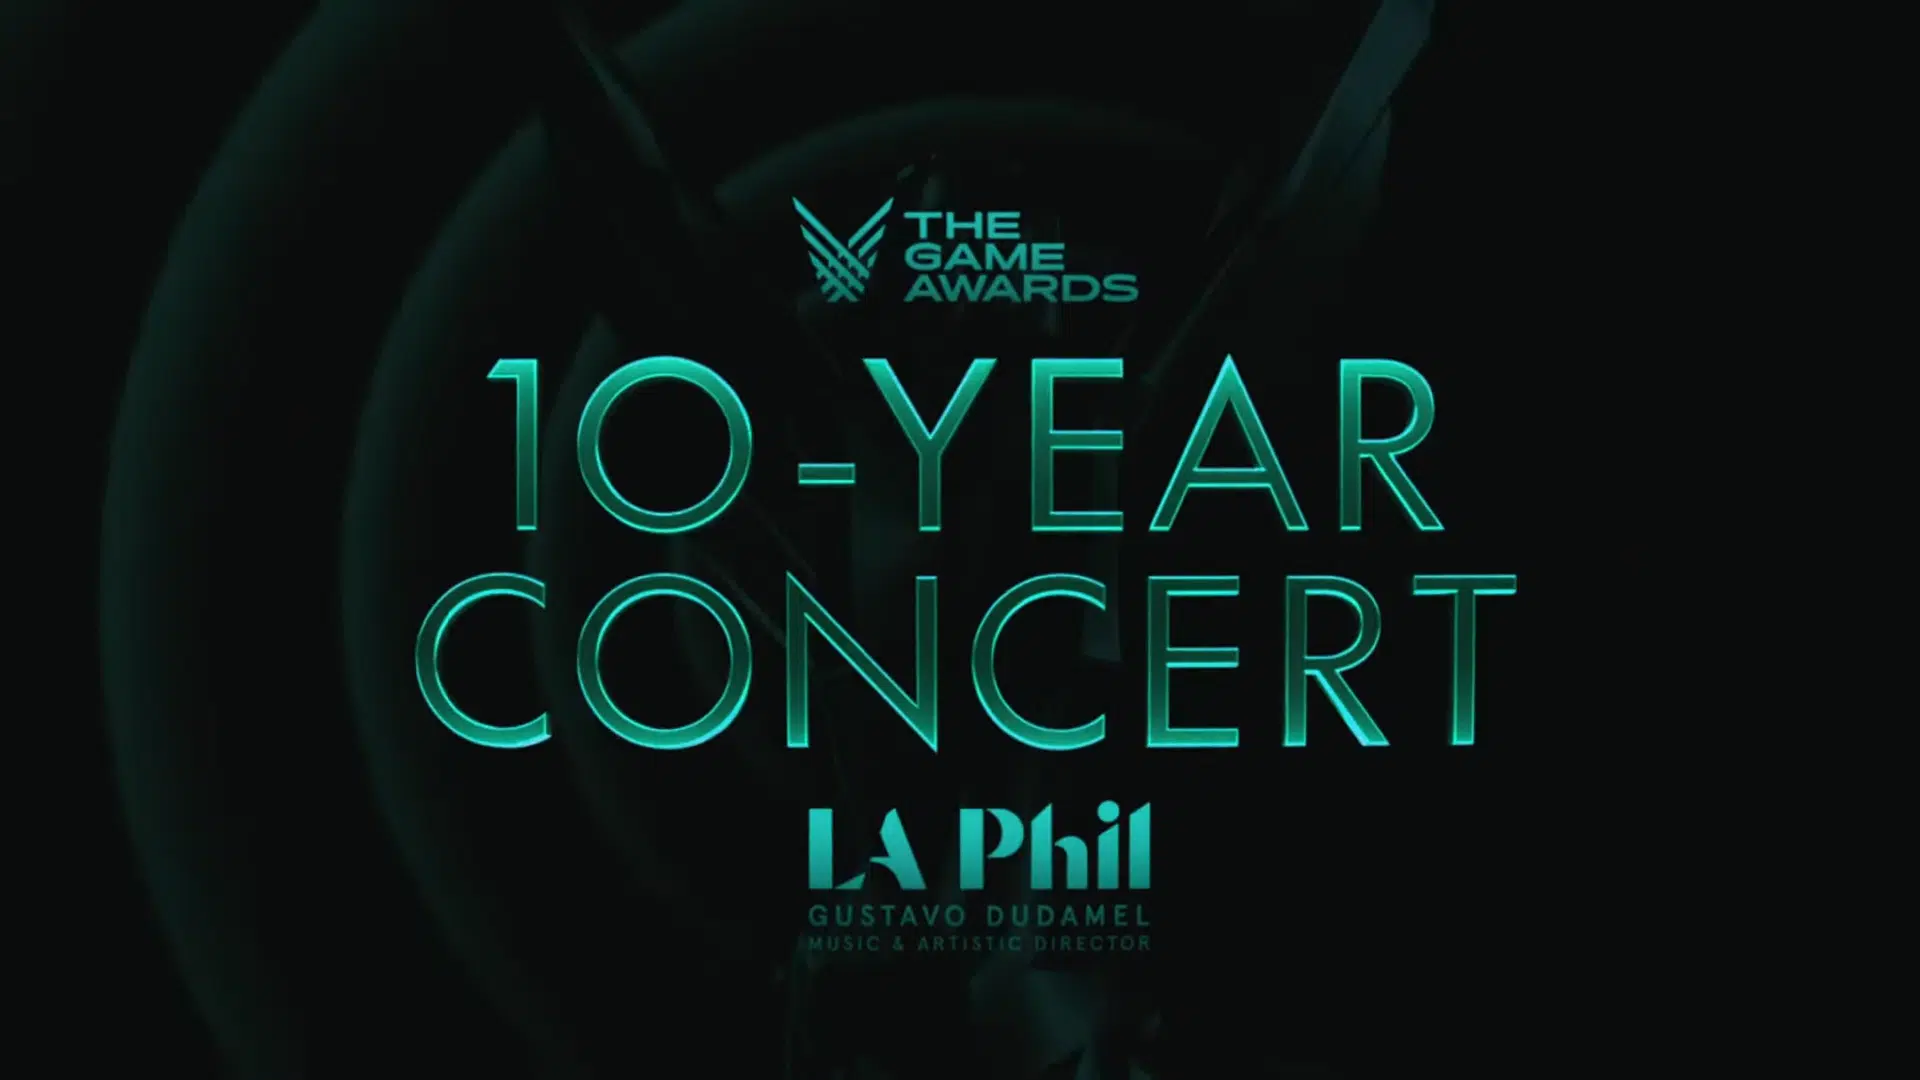 the game awards 10 year concert lineup